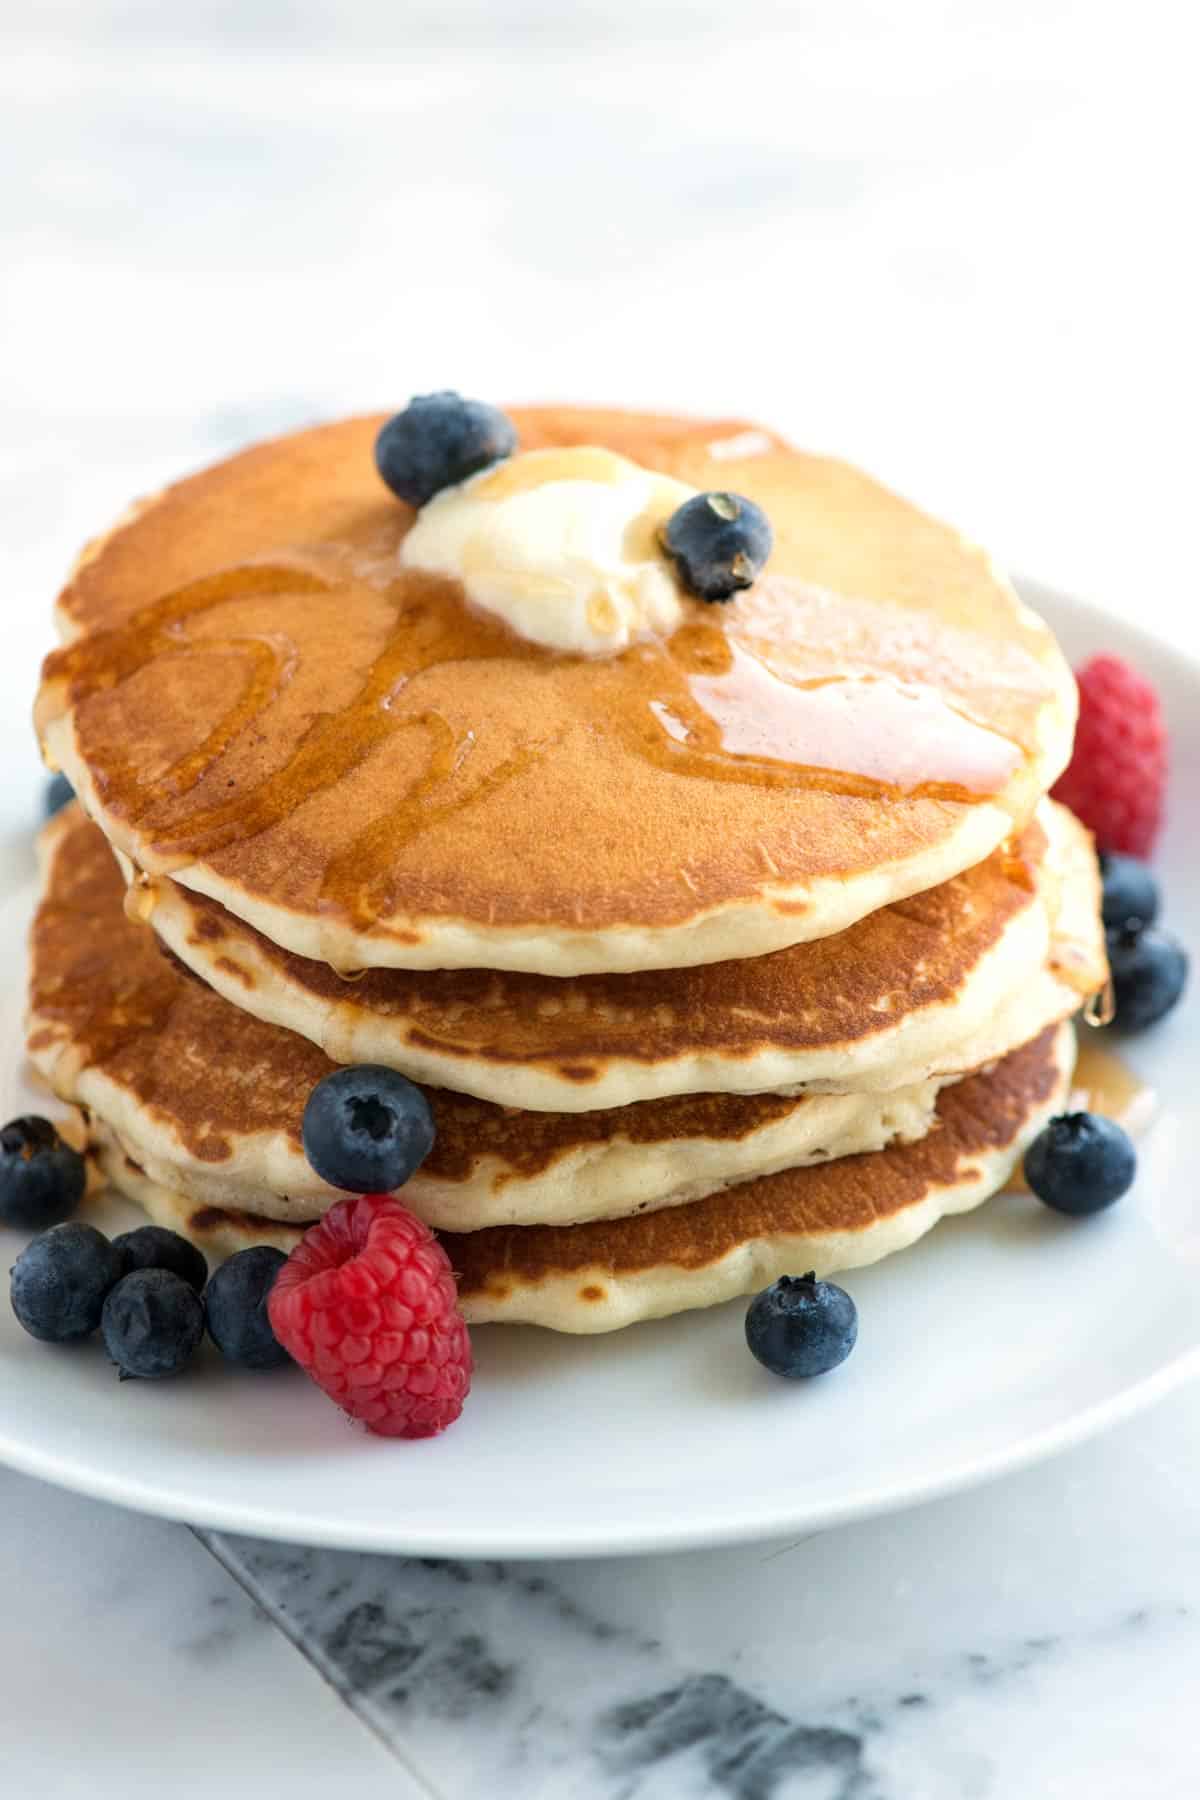 How to Make Our Easy Pancakes from Scratch